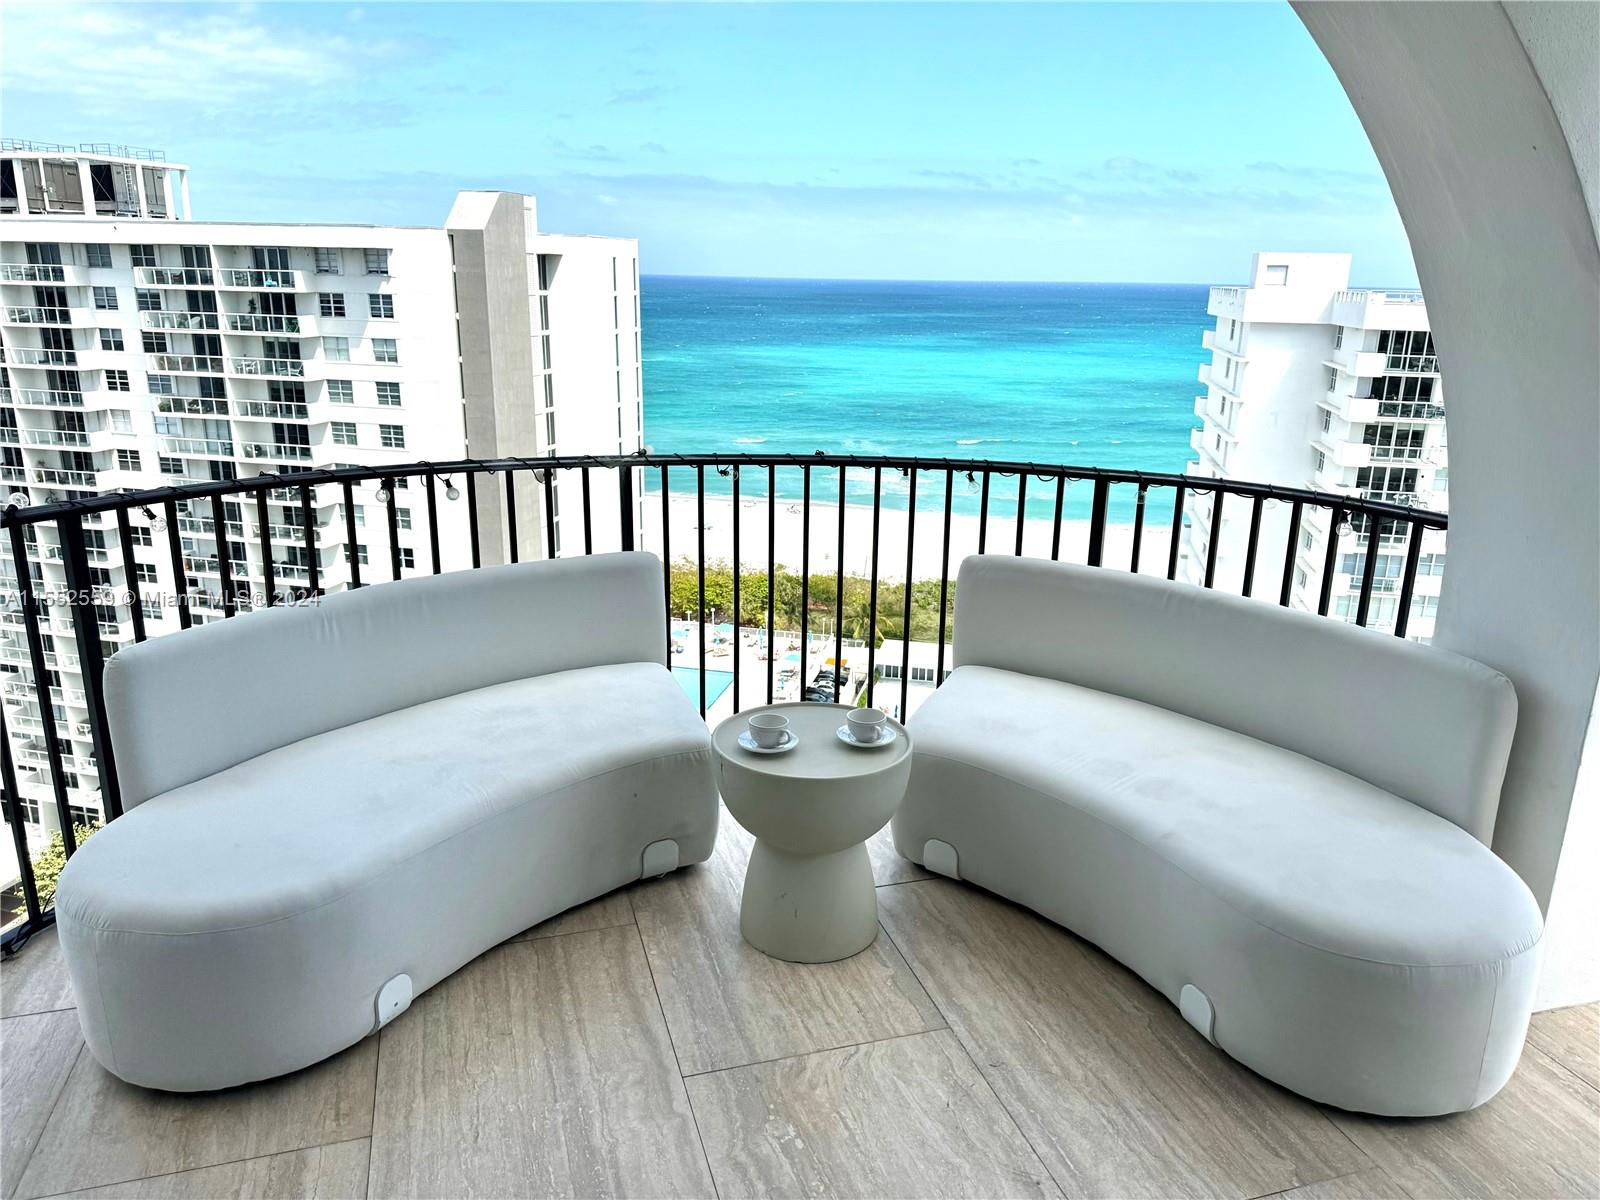 ***UNIQUE LOCATION AND ONE-OF-A-KIND HEAVEN IN THE SKY*** THIS IS THE MOST DREAMY PROPERTY IN MILLIONAIRE'S ROW. WITH TWO UNITS MERGED INTO ONE HUGE APARTMENT AND A LONG ELEGANT ENTRANCE GALLERY, THIS 4587 SQFT LISTING IS NOT GOING TO STAY LONG ON THE MARKET. YOU WILL HAVE THE MOST BEAUTIFUL SUNSET AND MIAMI SKYLINE + OCEANFRONT VIEW, TWO LIVING ROOM AREAS, ENORMOUS TERRACE OVERLOOKING MIAMI RIVER, DOUBLE KITCHEN (KOSHER), 4,5 BATHS + OFFICE. WATER VIEWS FROM EVERY CORNER OF THE APARTMENT, MARBLE FLOORS, FULL-SERVICE EXCLUSIVE BUILDING IN THE HEART OF MIAMI BEACH, FREE VALET PARKING, MARINA DOCK, BEAUTIFUL POOL AREA, FULLY EQUIPPED FITNESS CENTER, BARBEQUE AREA, BILLIARD ROOM, 24HRS FRONT DESK SERVICE, AND THE BEACH RIGHT ACROSS THE STREET.  PROPERTY COMES WITH TWO ASSIGNED PARKING SPOTS.